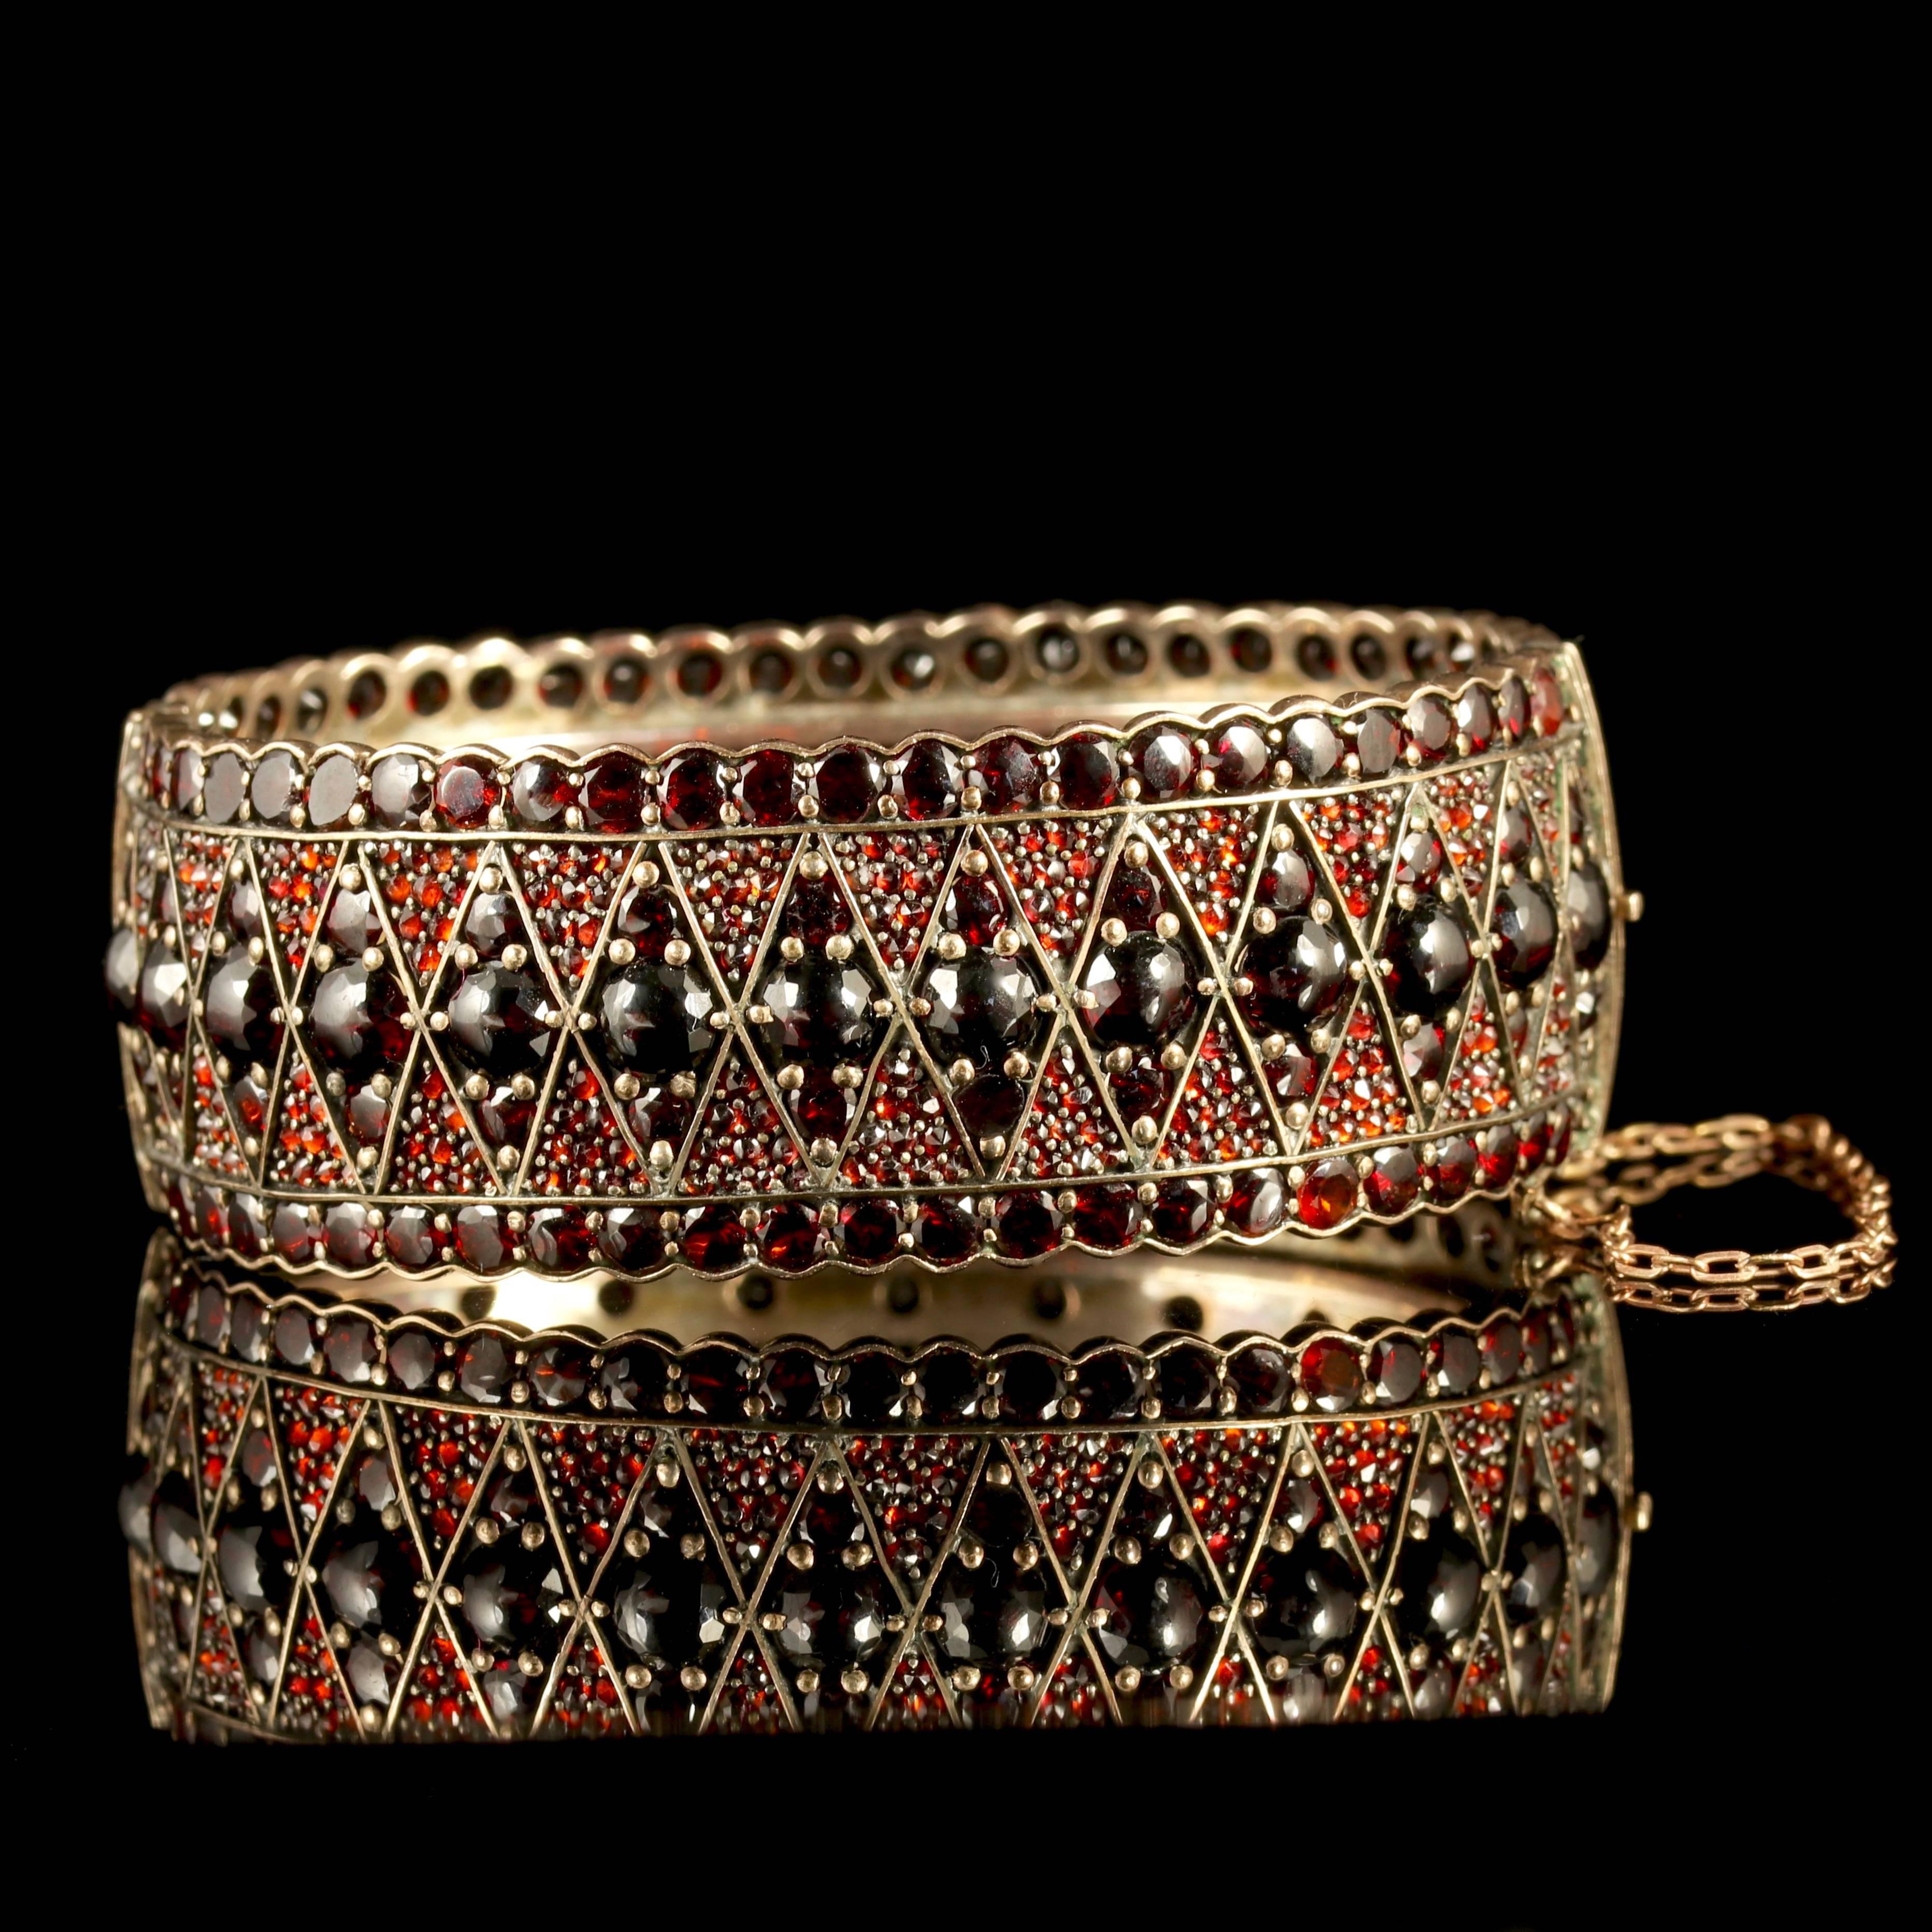 This has to be one of the most stunning boxed Bohemian Garnet bangles we have ever exhibited for sale.

Genuine Victorian, Circa 1880.

The Garnets cascade all the way around the bangle, displaying spectacular beauty and pristine detailed